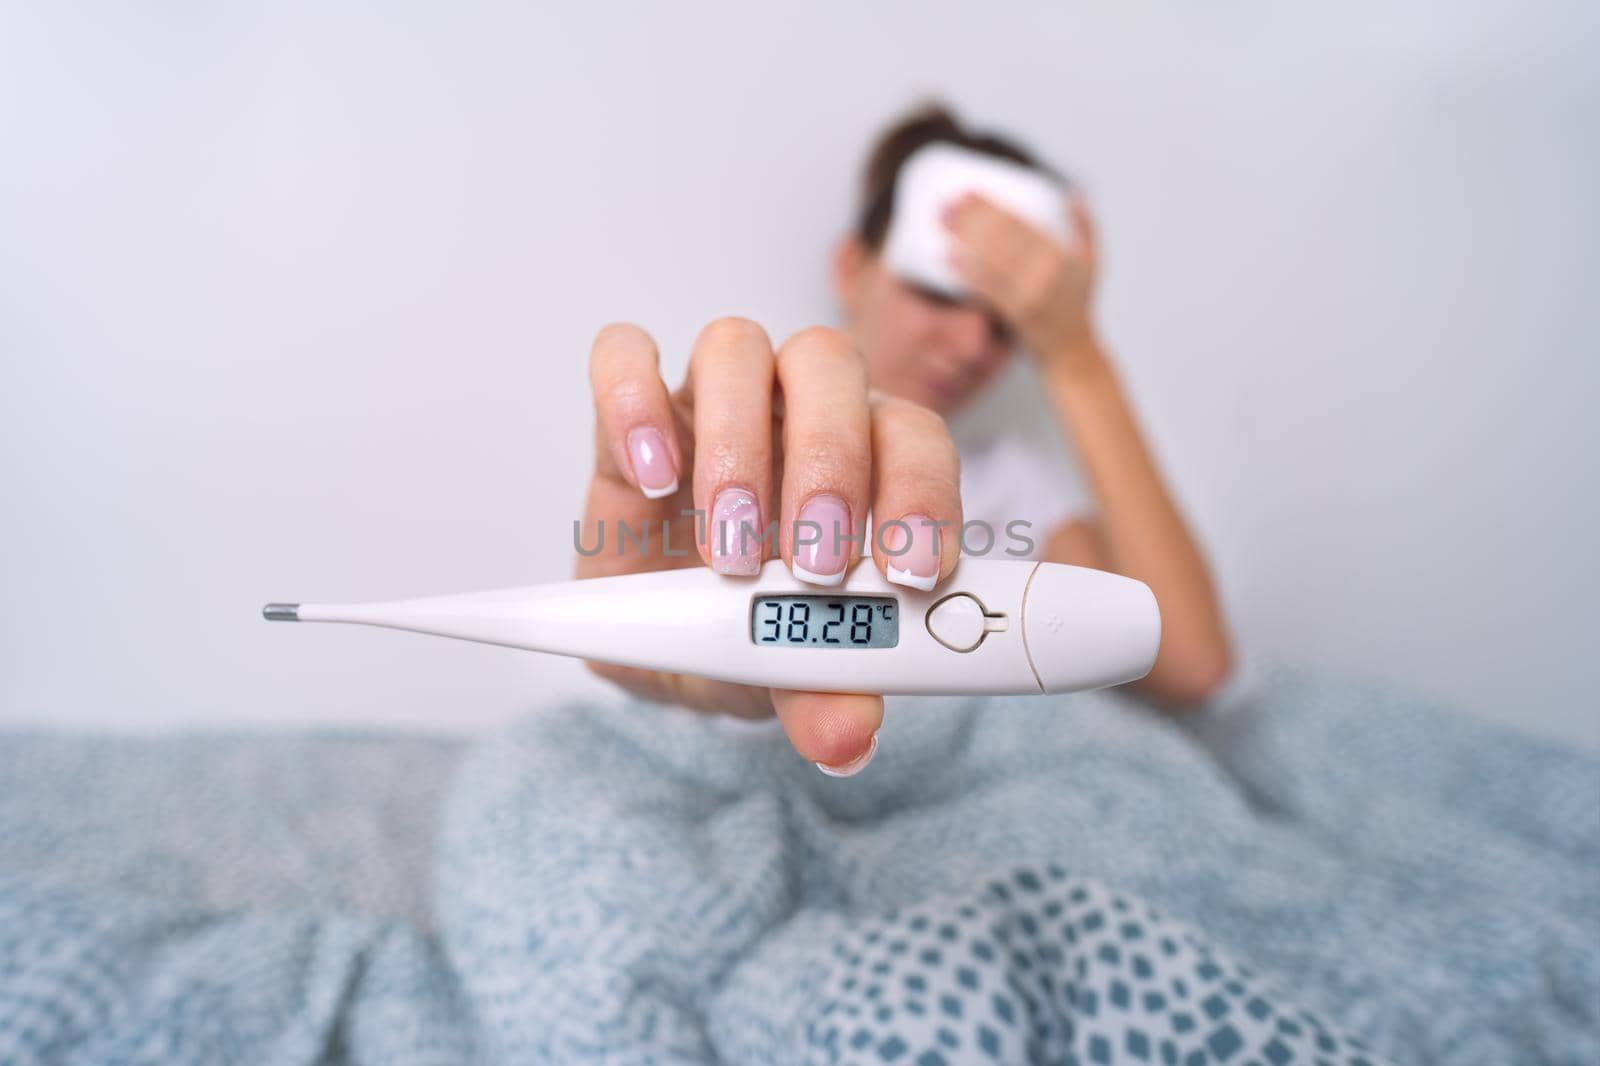 Sick woman with a high fever showing medical thermometer with temperature 38,2. Woman measuring body temperature. High quality photo